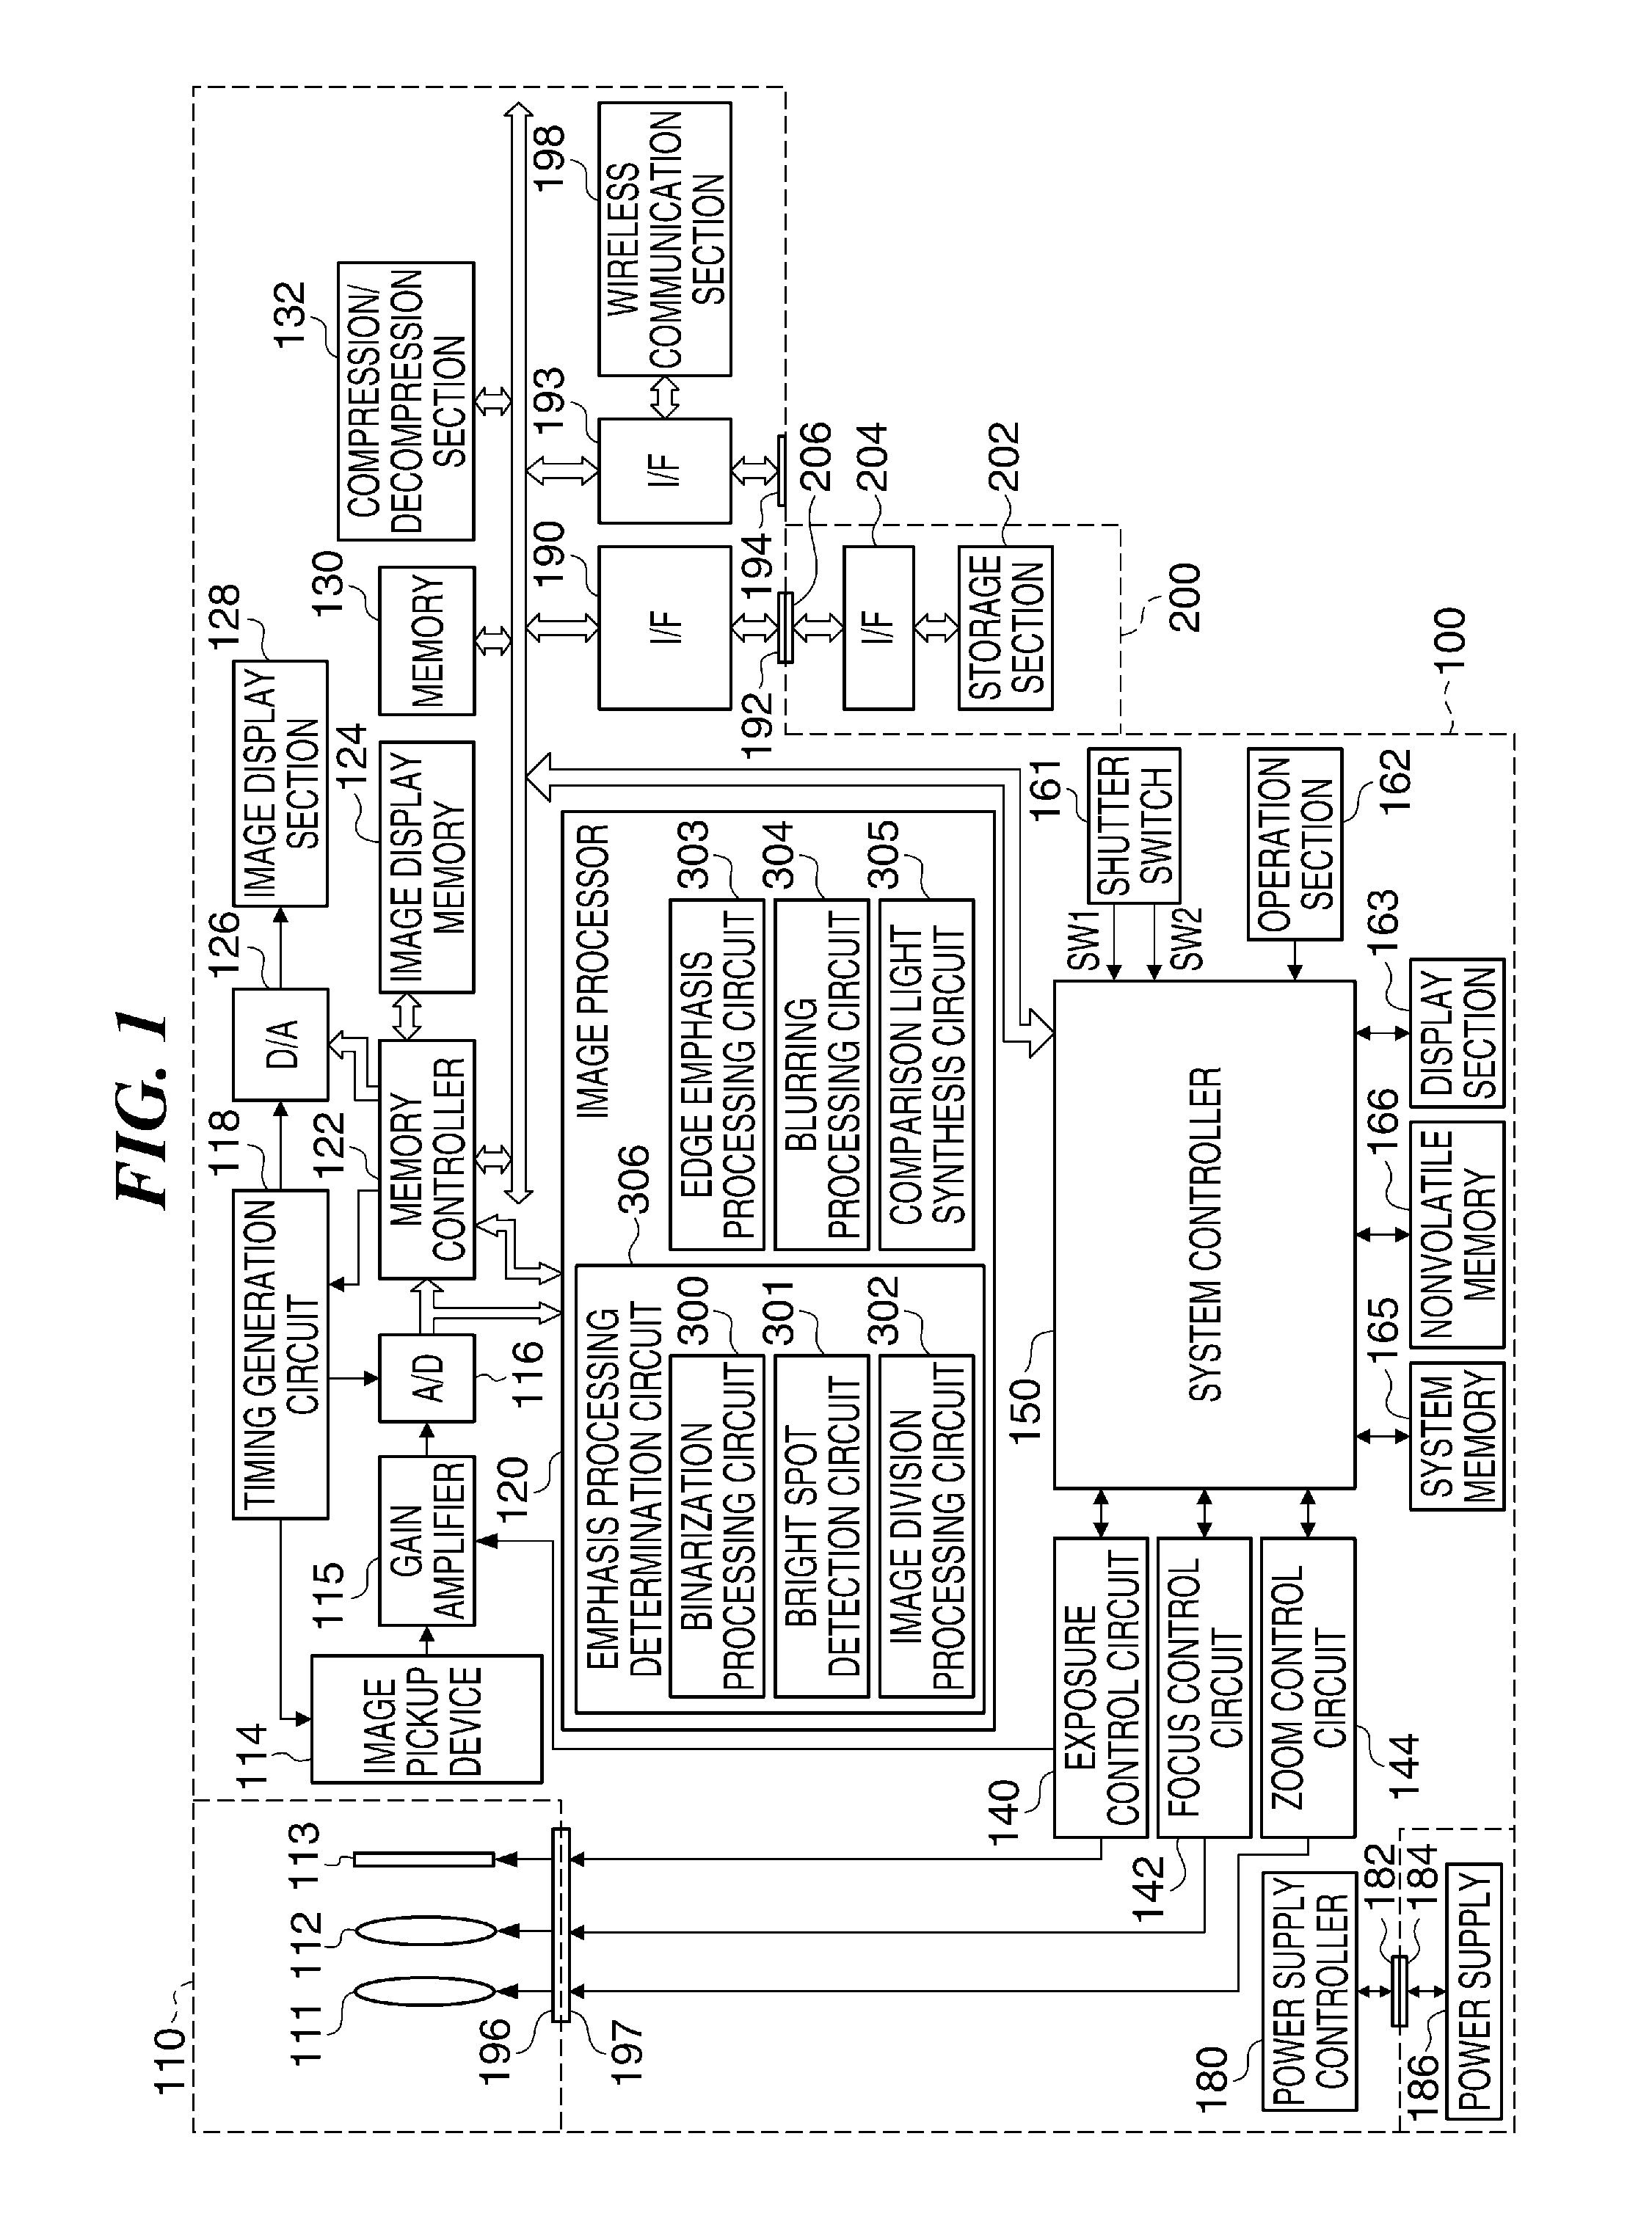 Image processing apparatus capable of properly emphasizing differences in brightness between bright spots, image processing method, and storage medium